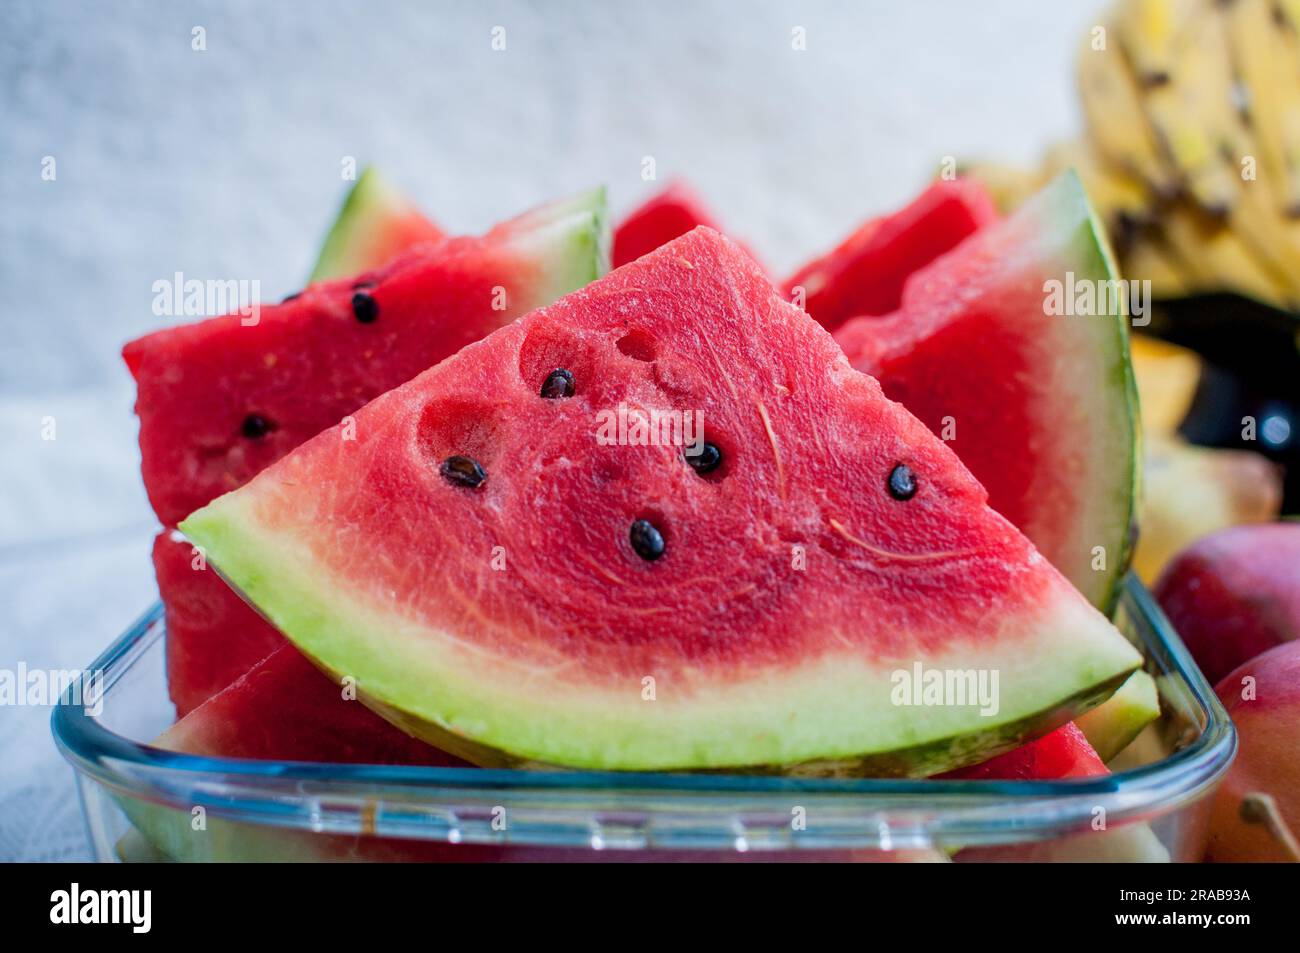 Slices of watermelons. Tropical fruits. Stock Photo